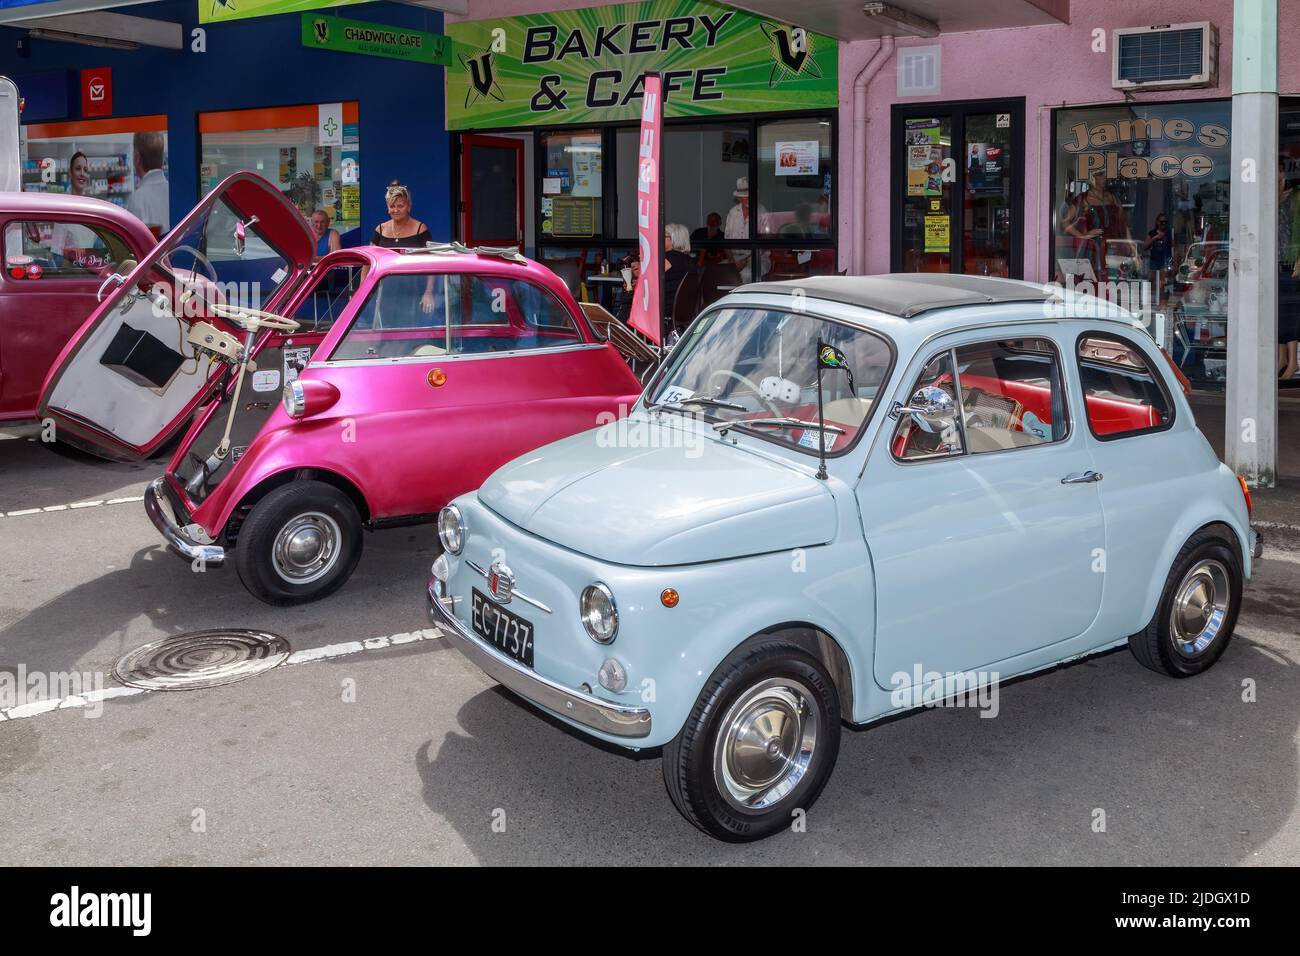 Two tiny 'bubble cars', a 1969 Fiat Saloon 500 (front) and 1963 BMW Isetta (rear) on display at a classic car show. Tauranga, New Zealand Stock Photo